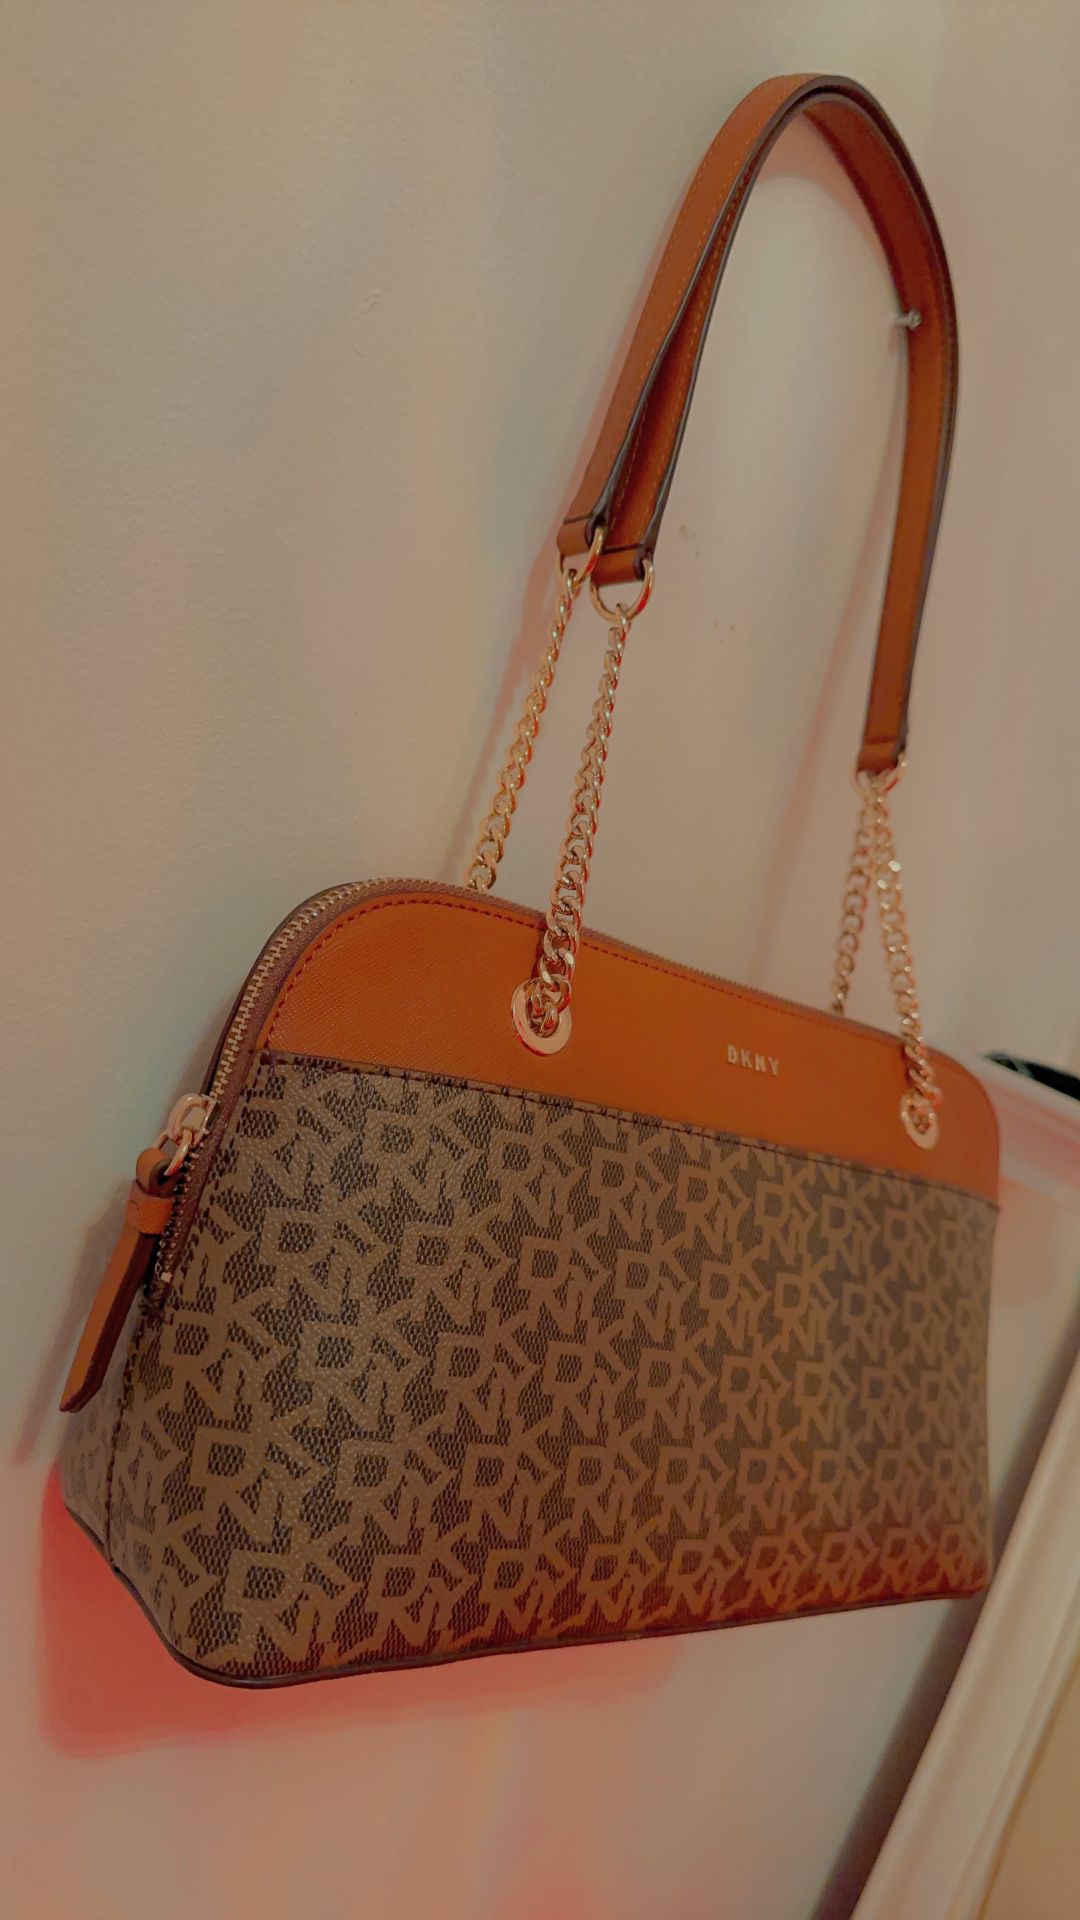 New DKNY Bryant park medium bag for Sale in New Rochelle, NY - OfferUp